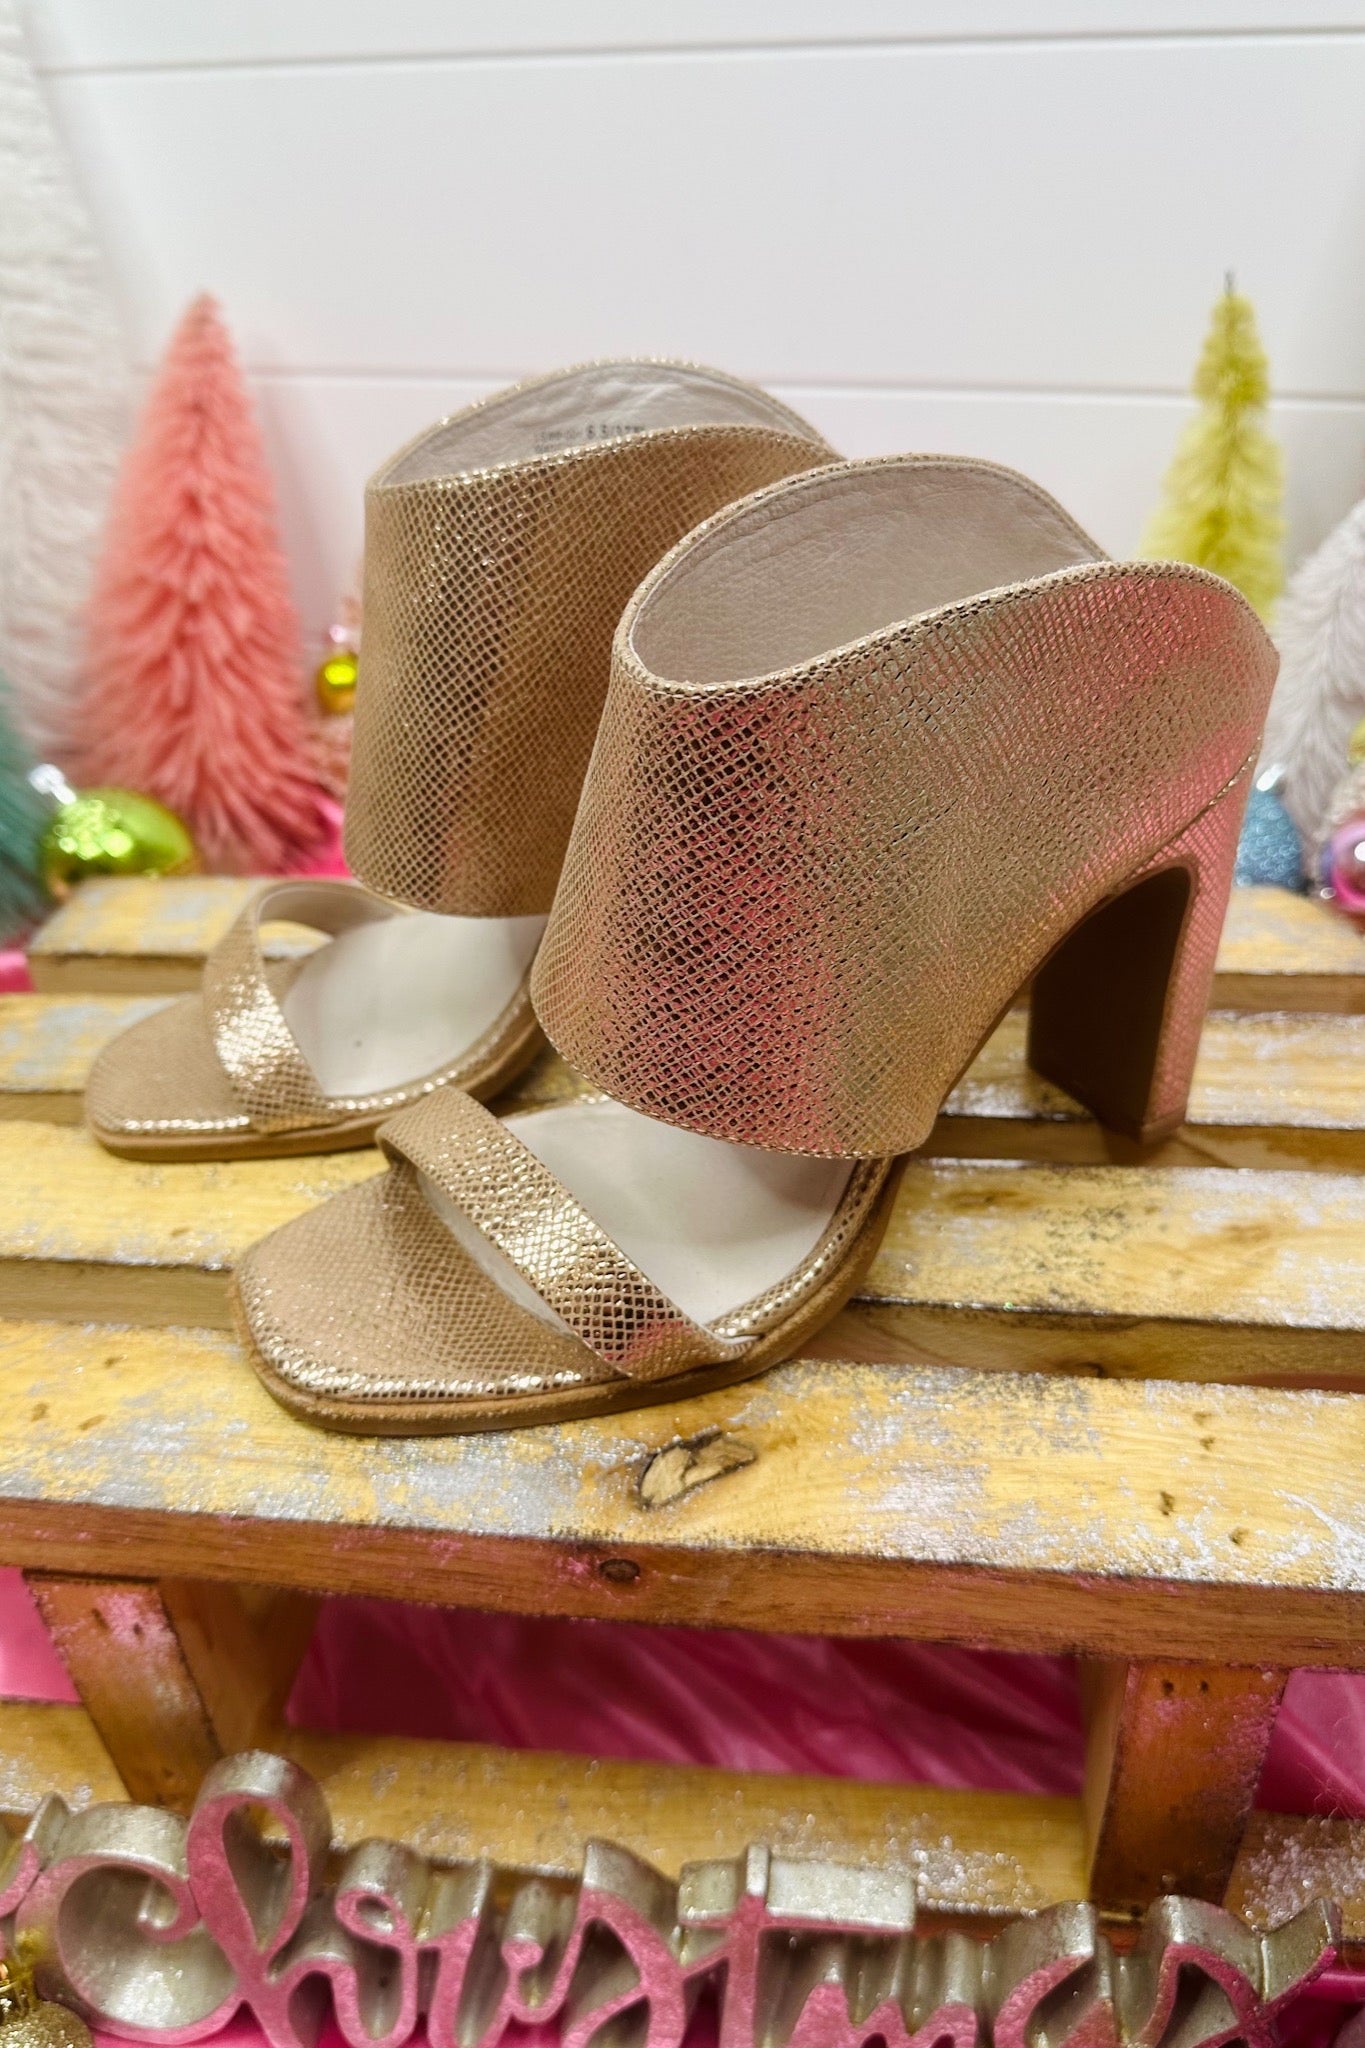 The Linx Textured Metallic Heels in Rose Gold by 42 Gold